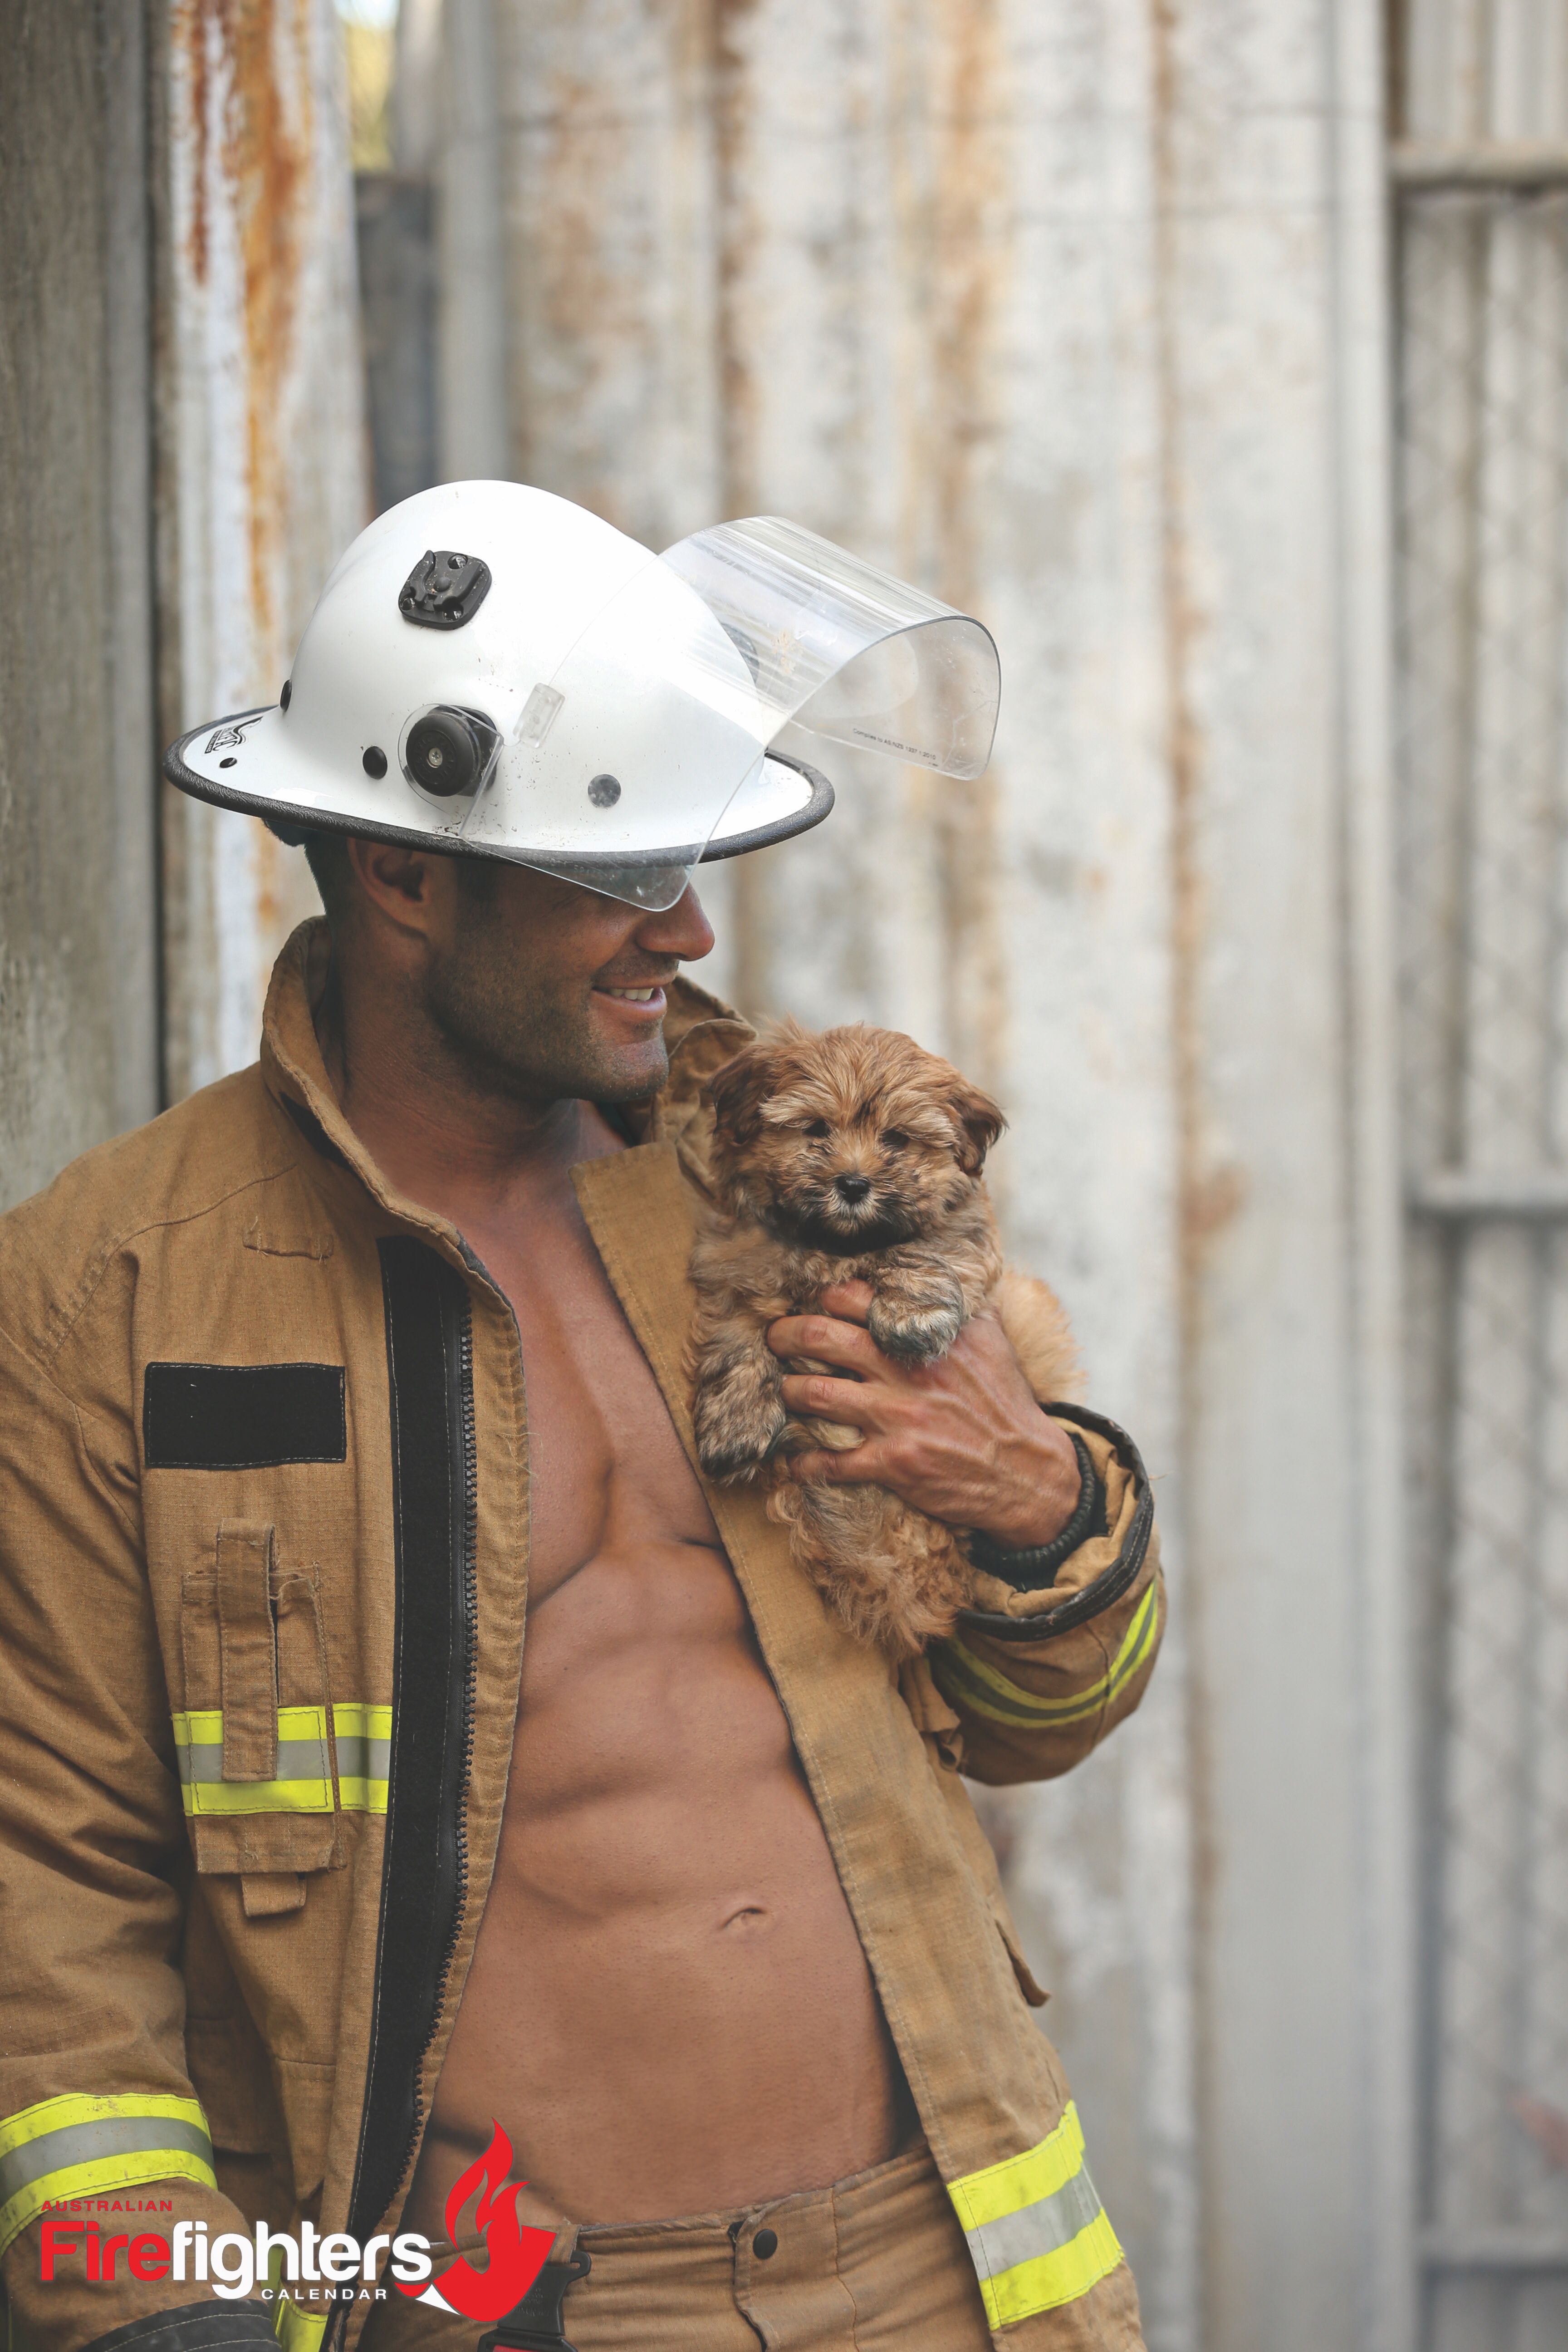 24 Photos From The 2018 Australian Firefighters Calendars